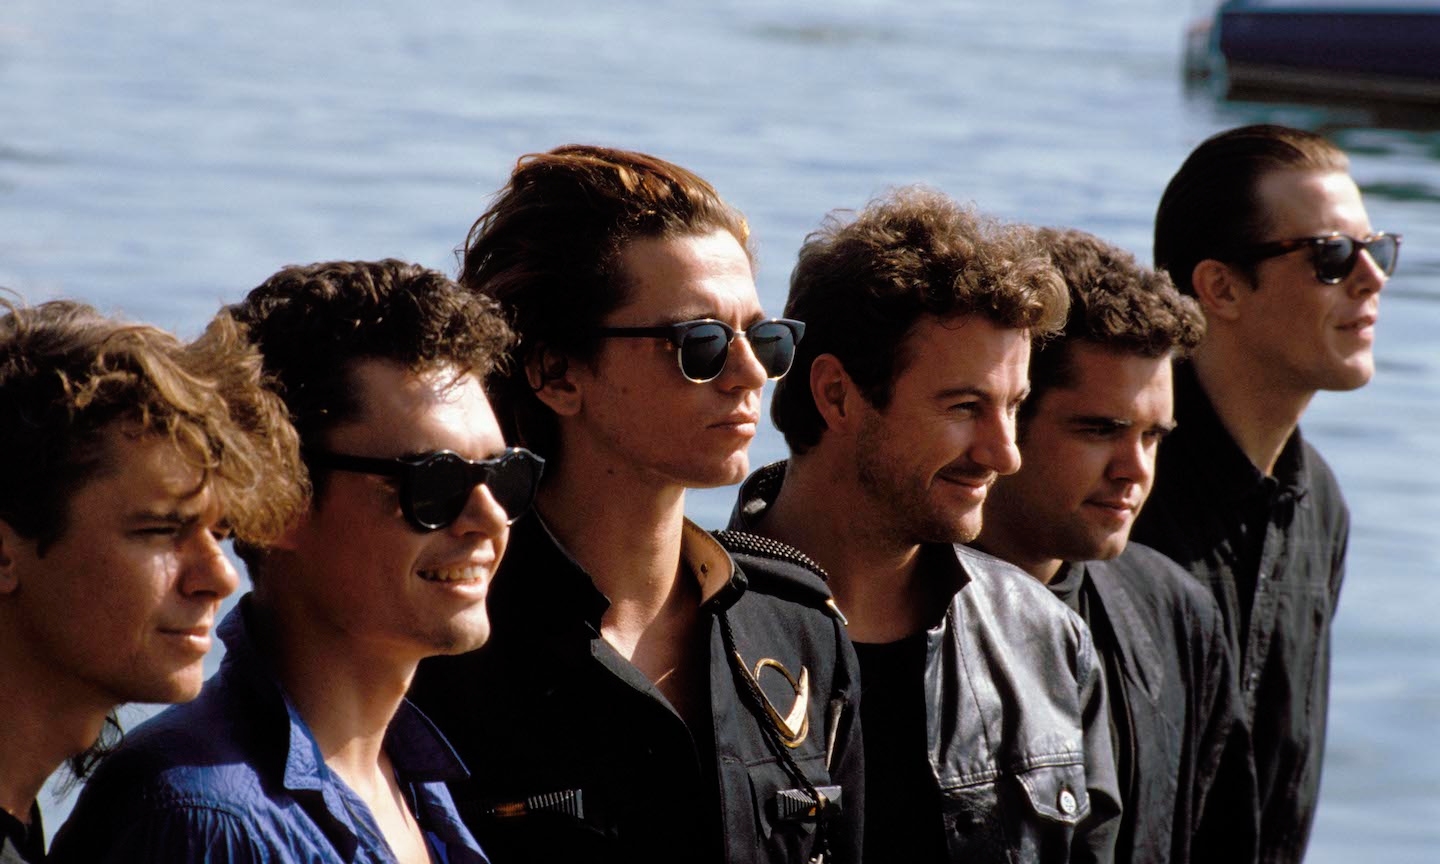 INXS Shares Behind The Scenes Look At ‘Never Tear Us Apart’